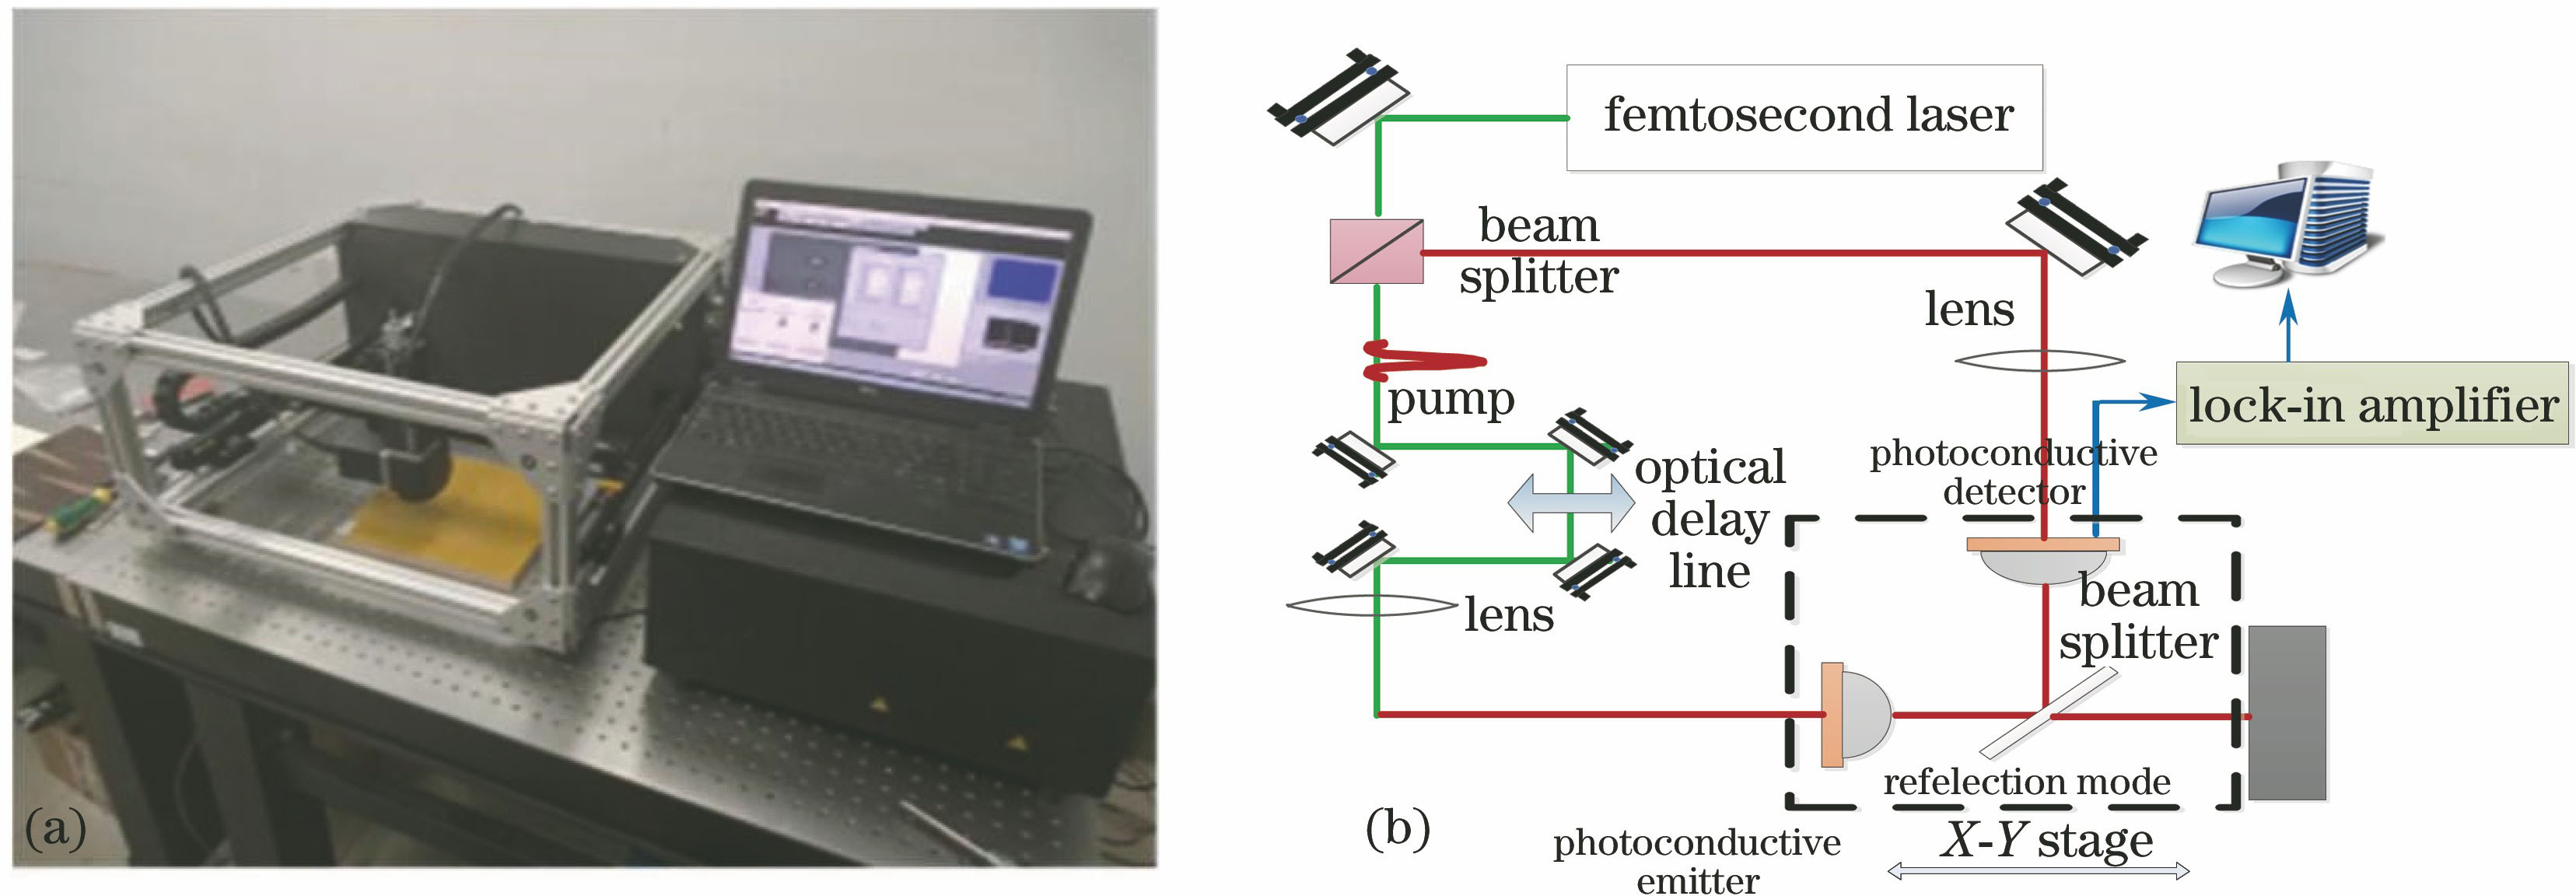 Photograph and schematic of terahertz time-domain spectroscopy system. (a) Photograph; (b) working principle